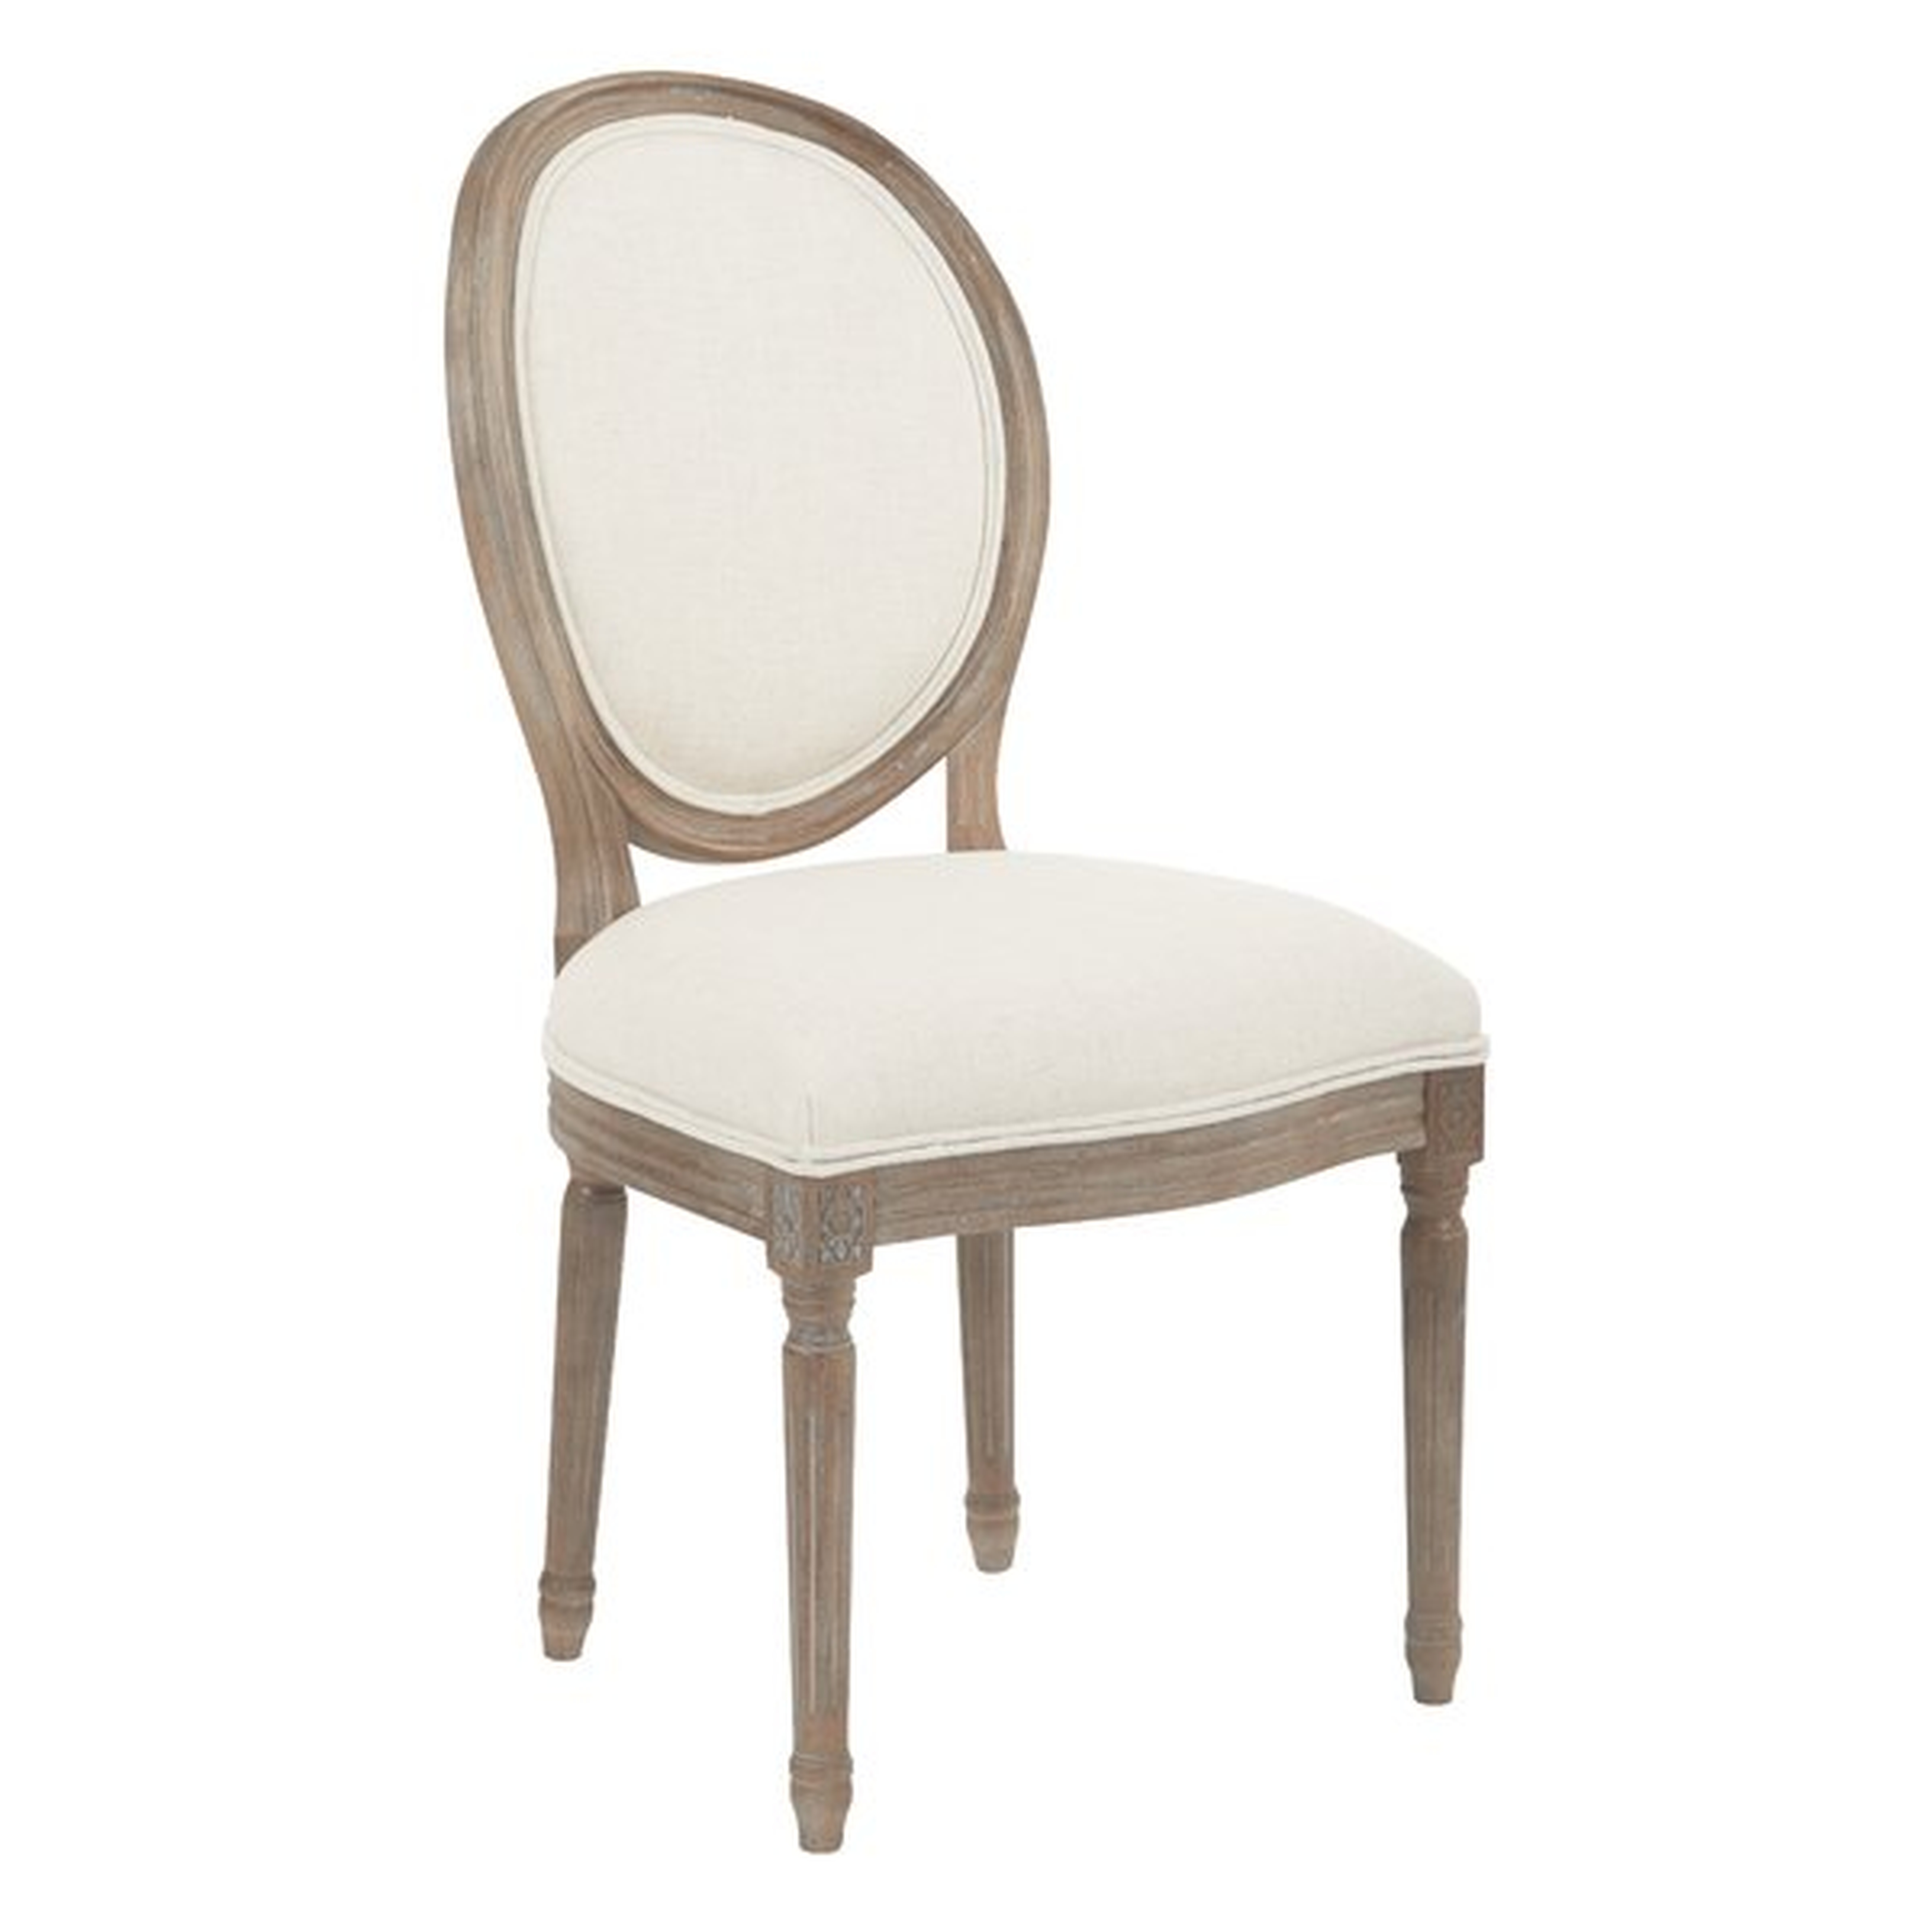 Haleigh Oval Back Upholstered Dining Chair - Wayfair